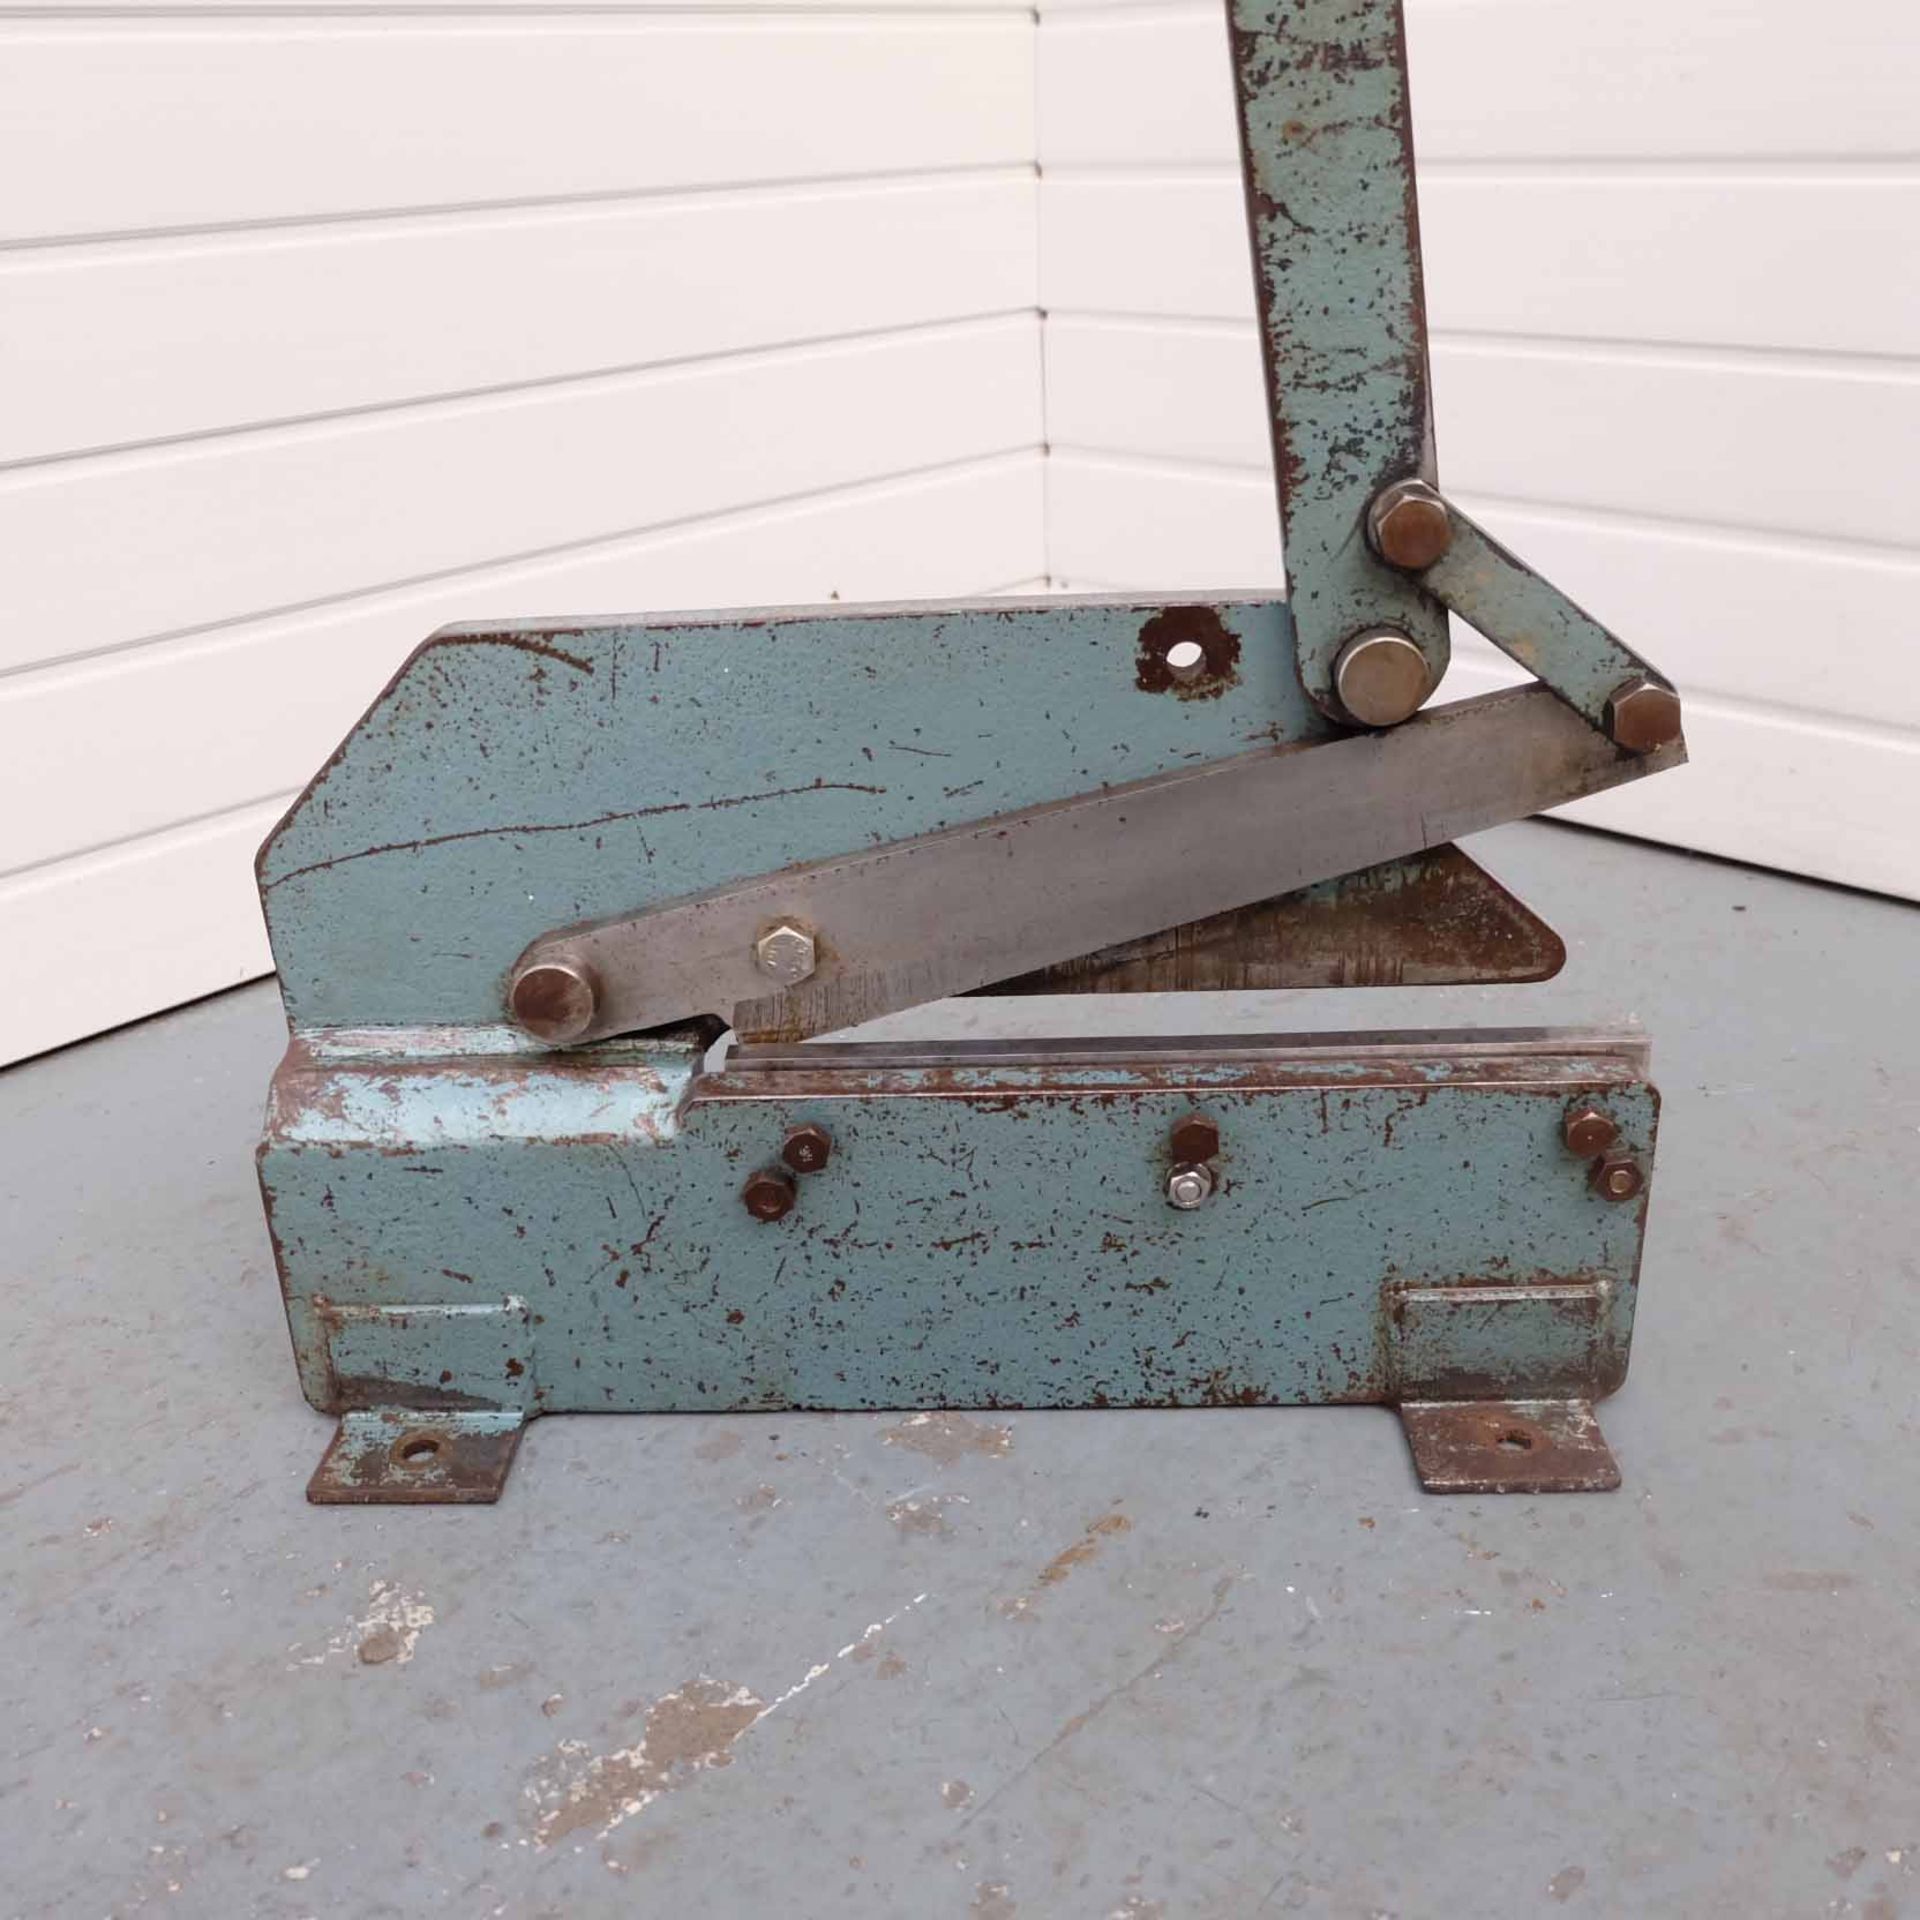 K5 Shears Bench Top Cropper. Blade Length 11". - Image 4 of 5